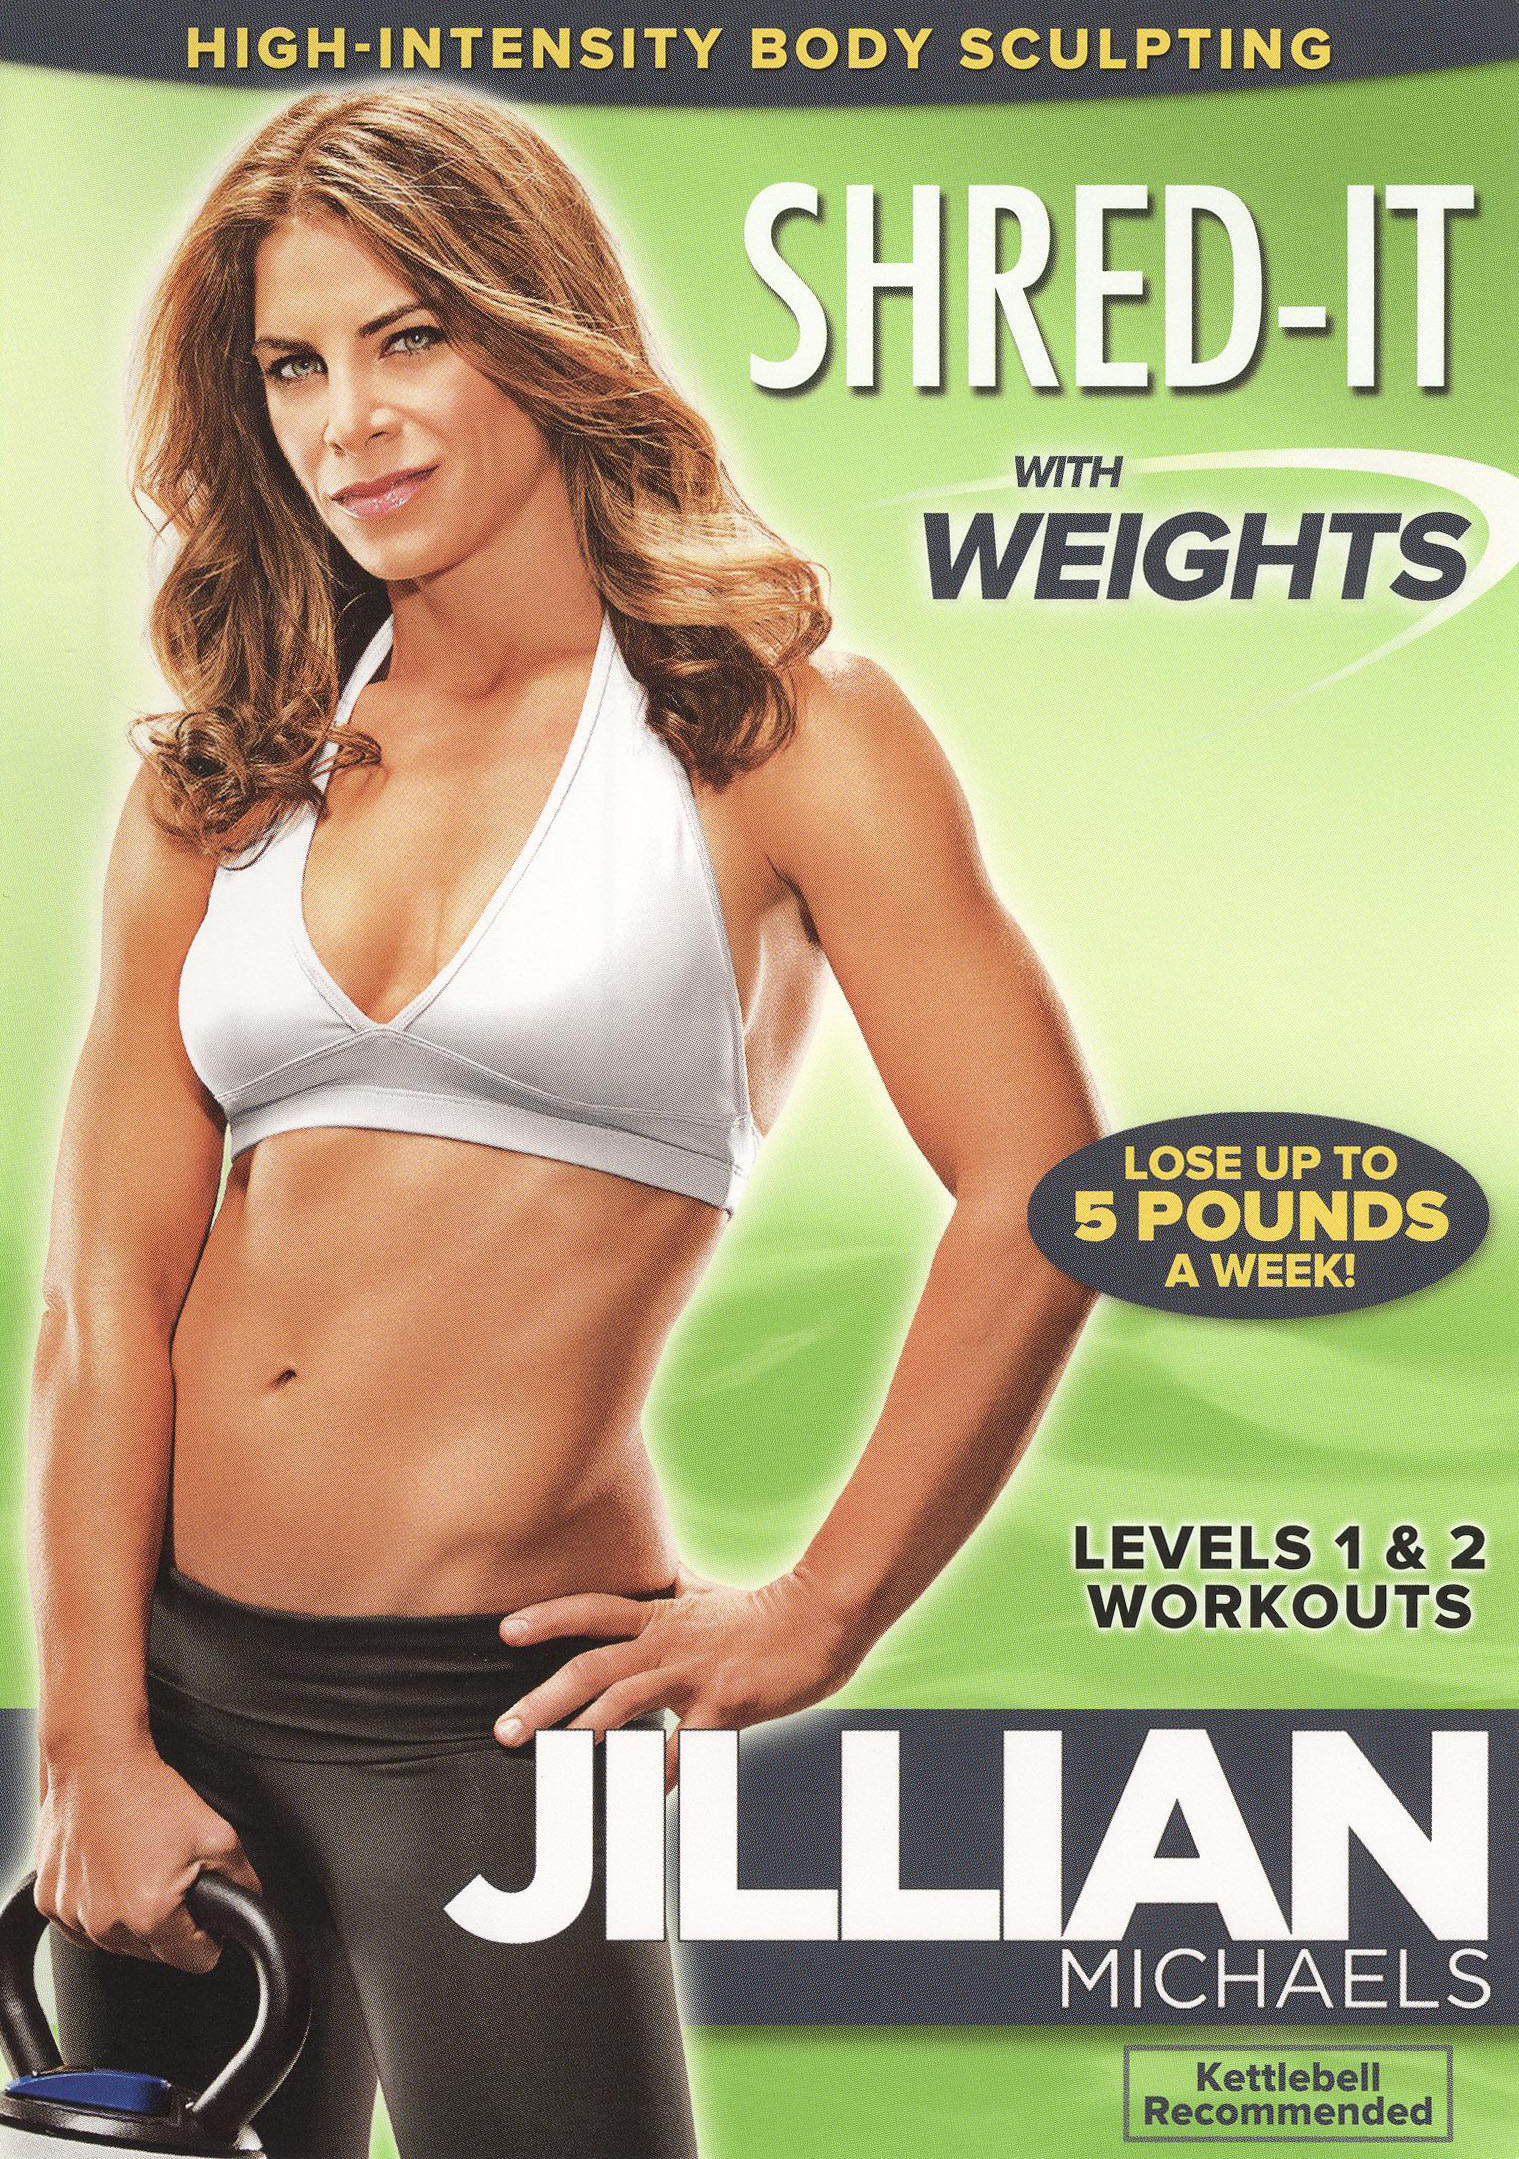 Jillian Michaels' Daily Diet to Stay Fit and Optimize Metabolism